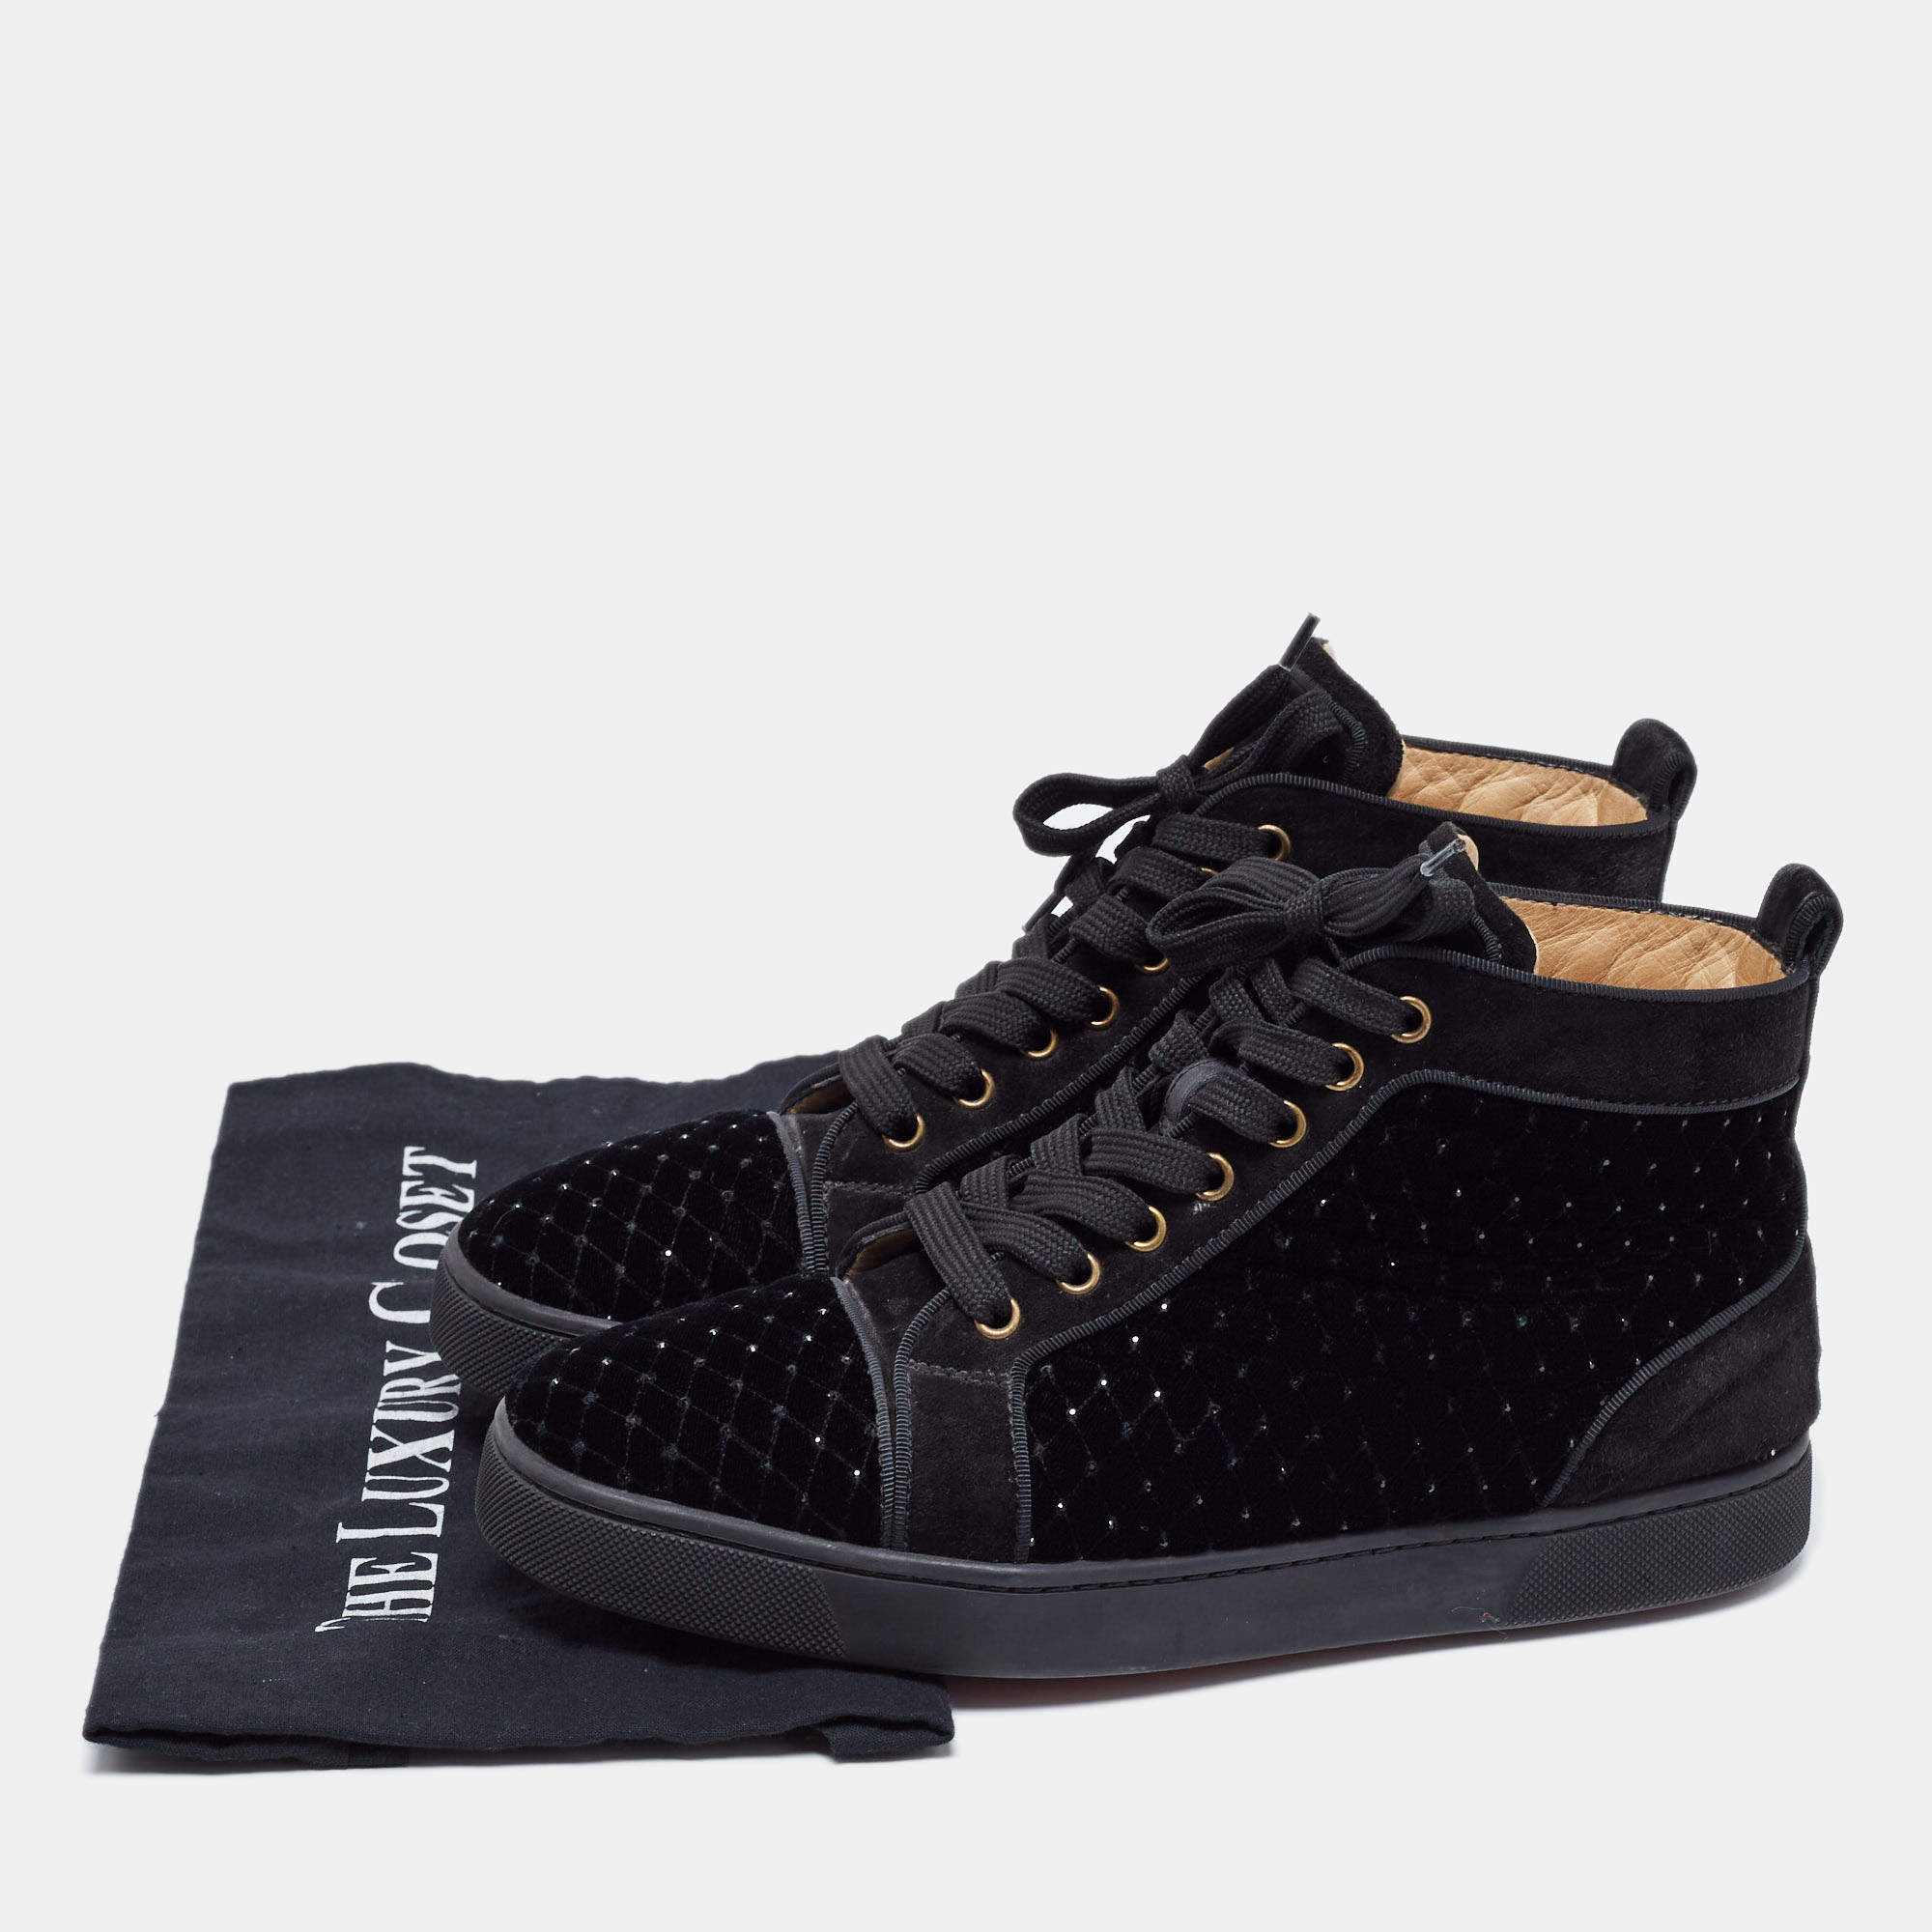 Louis Vuitton, Shoes, Christian Louboutin Black Spike Velvet Low Studded  Sneakers